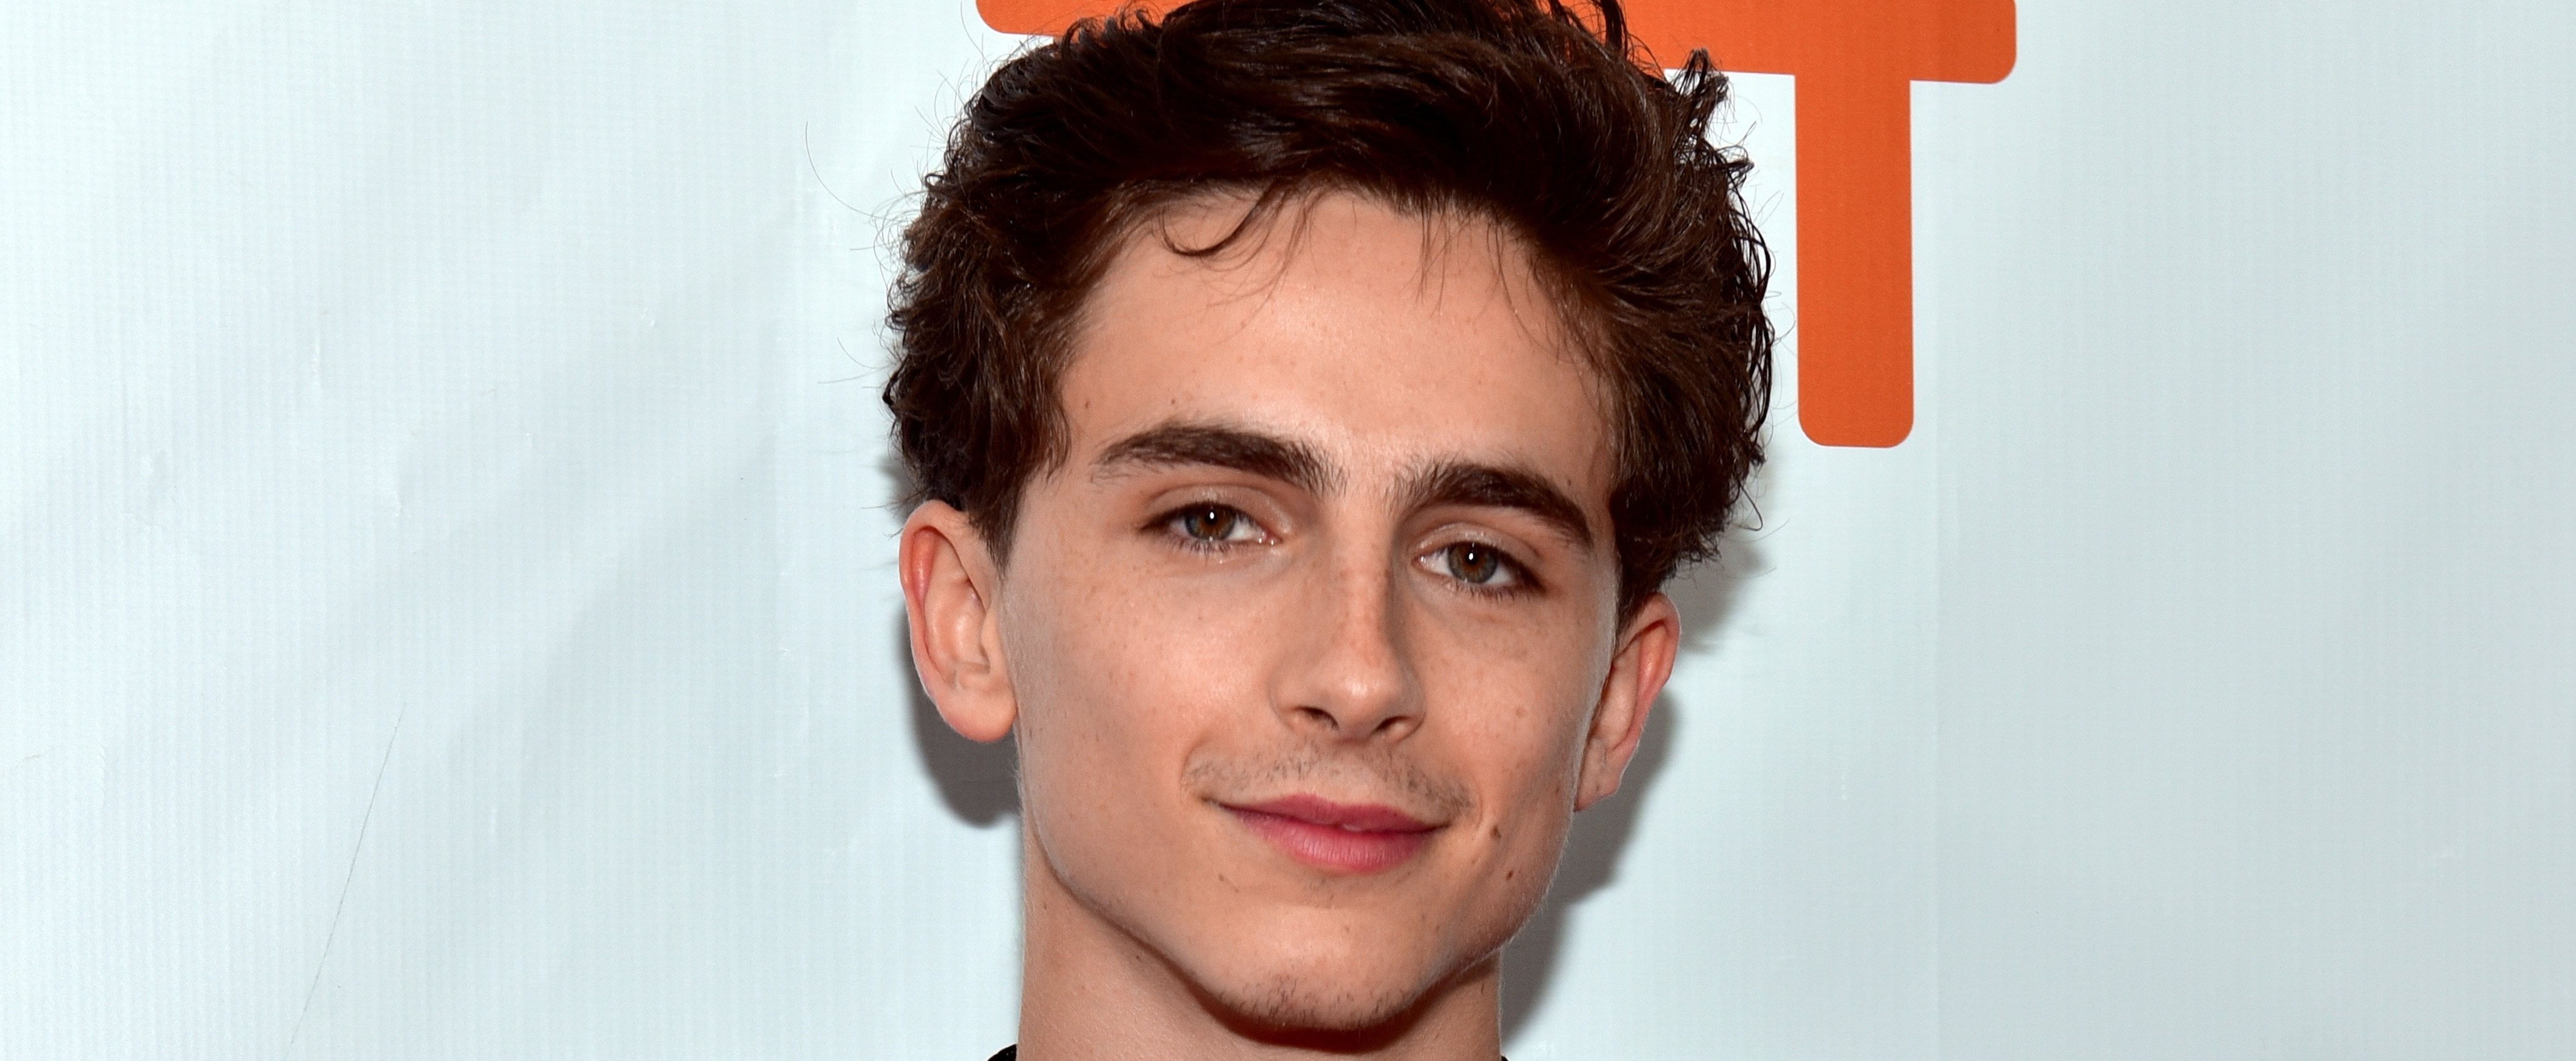 Timothée Chalamet and Lily-Rose Depp Are the Newest Style Couple